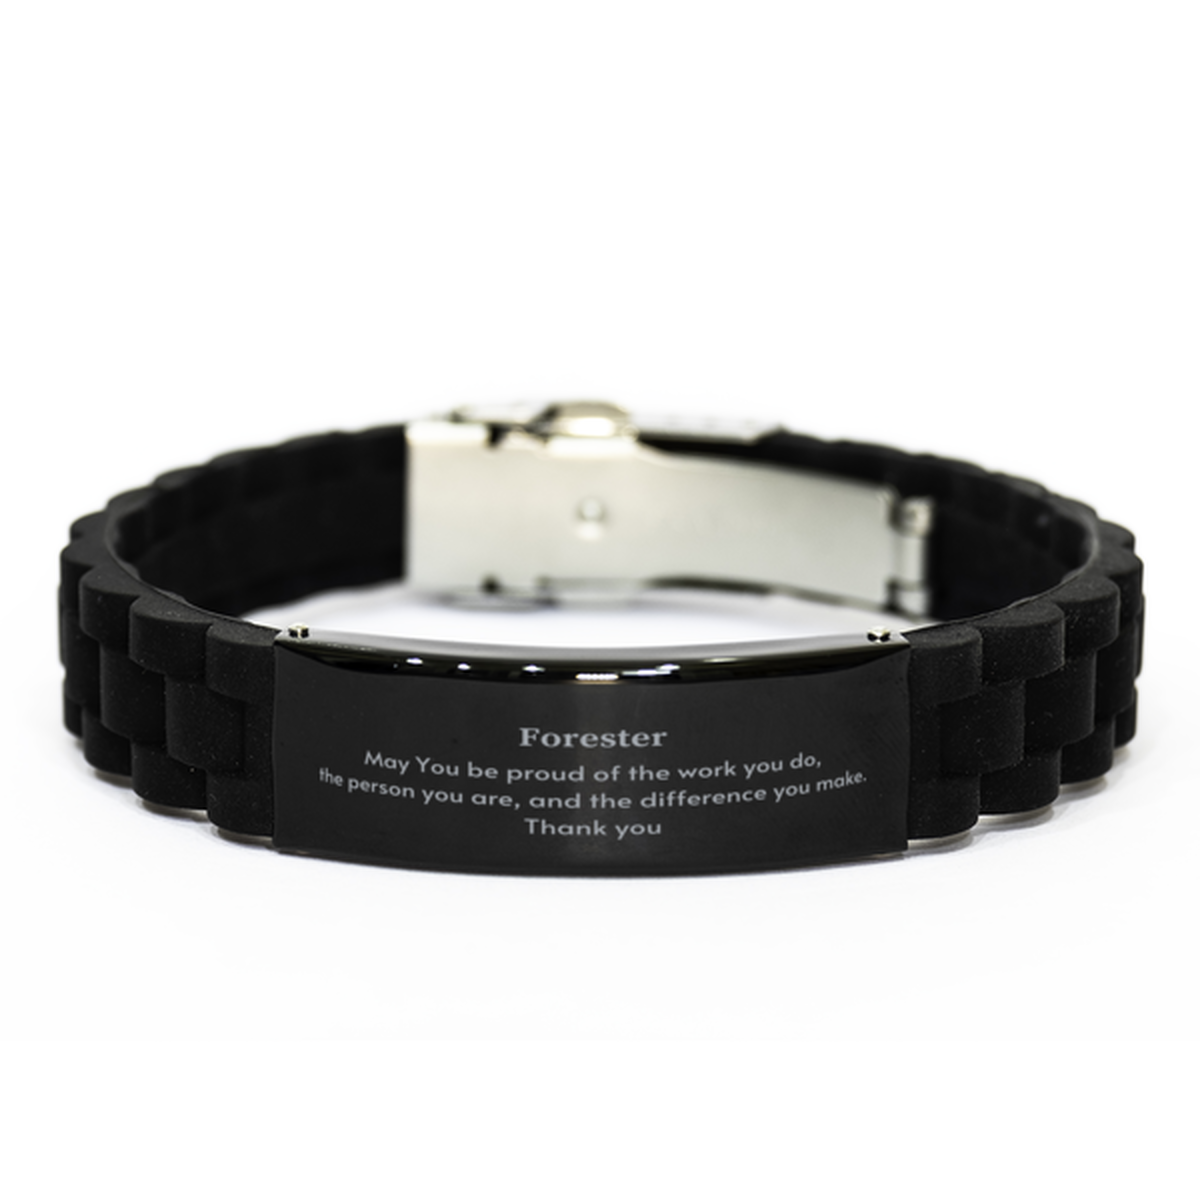 Heartwarming Black Glidelock Clasp Bracelet Retirement Coworkers Gifts for Forester, Forester May You be proud of the work you do, the person you are Gifts for Boss Men Women Friends